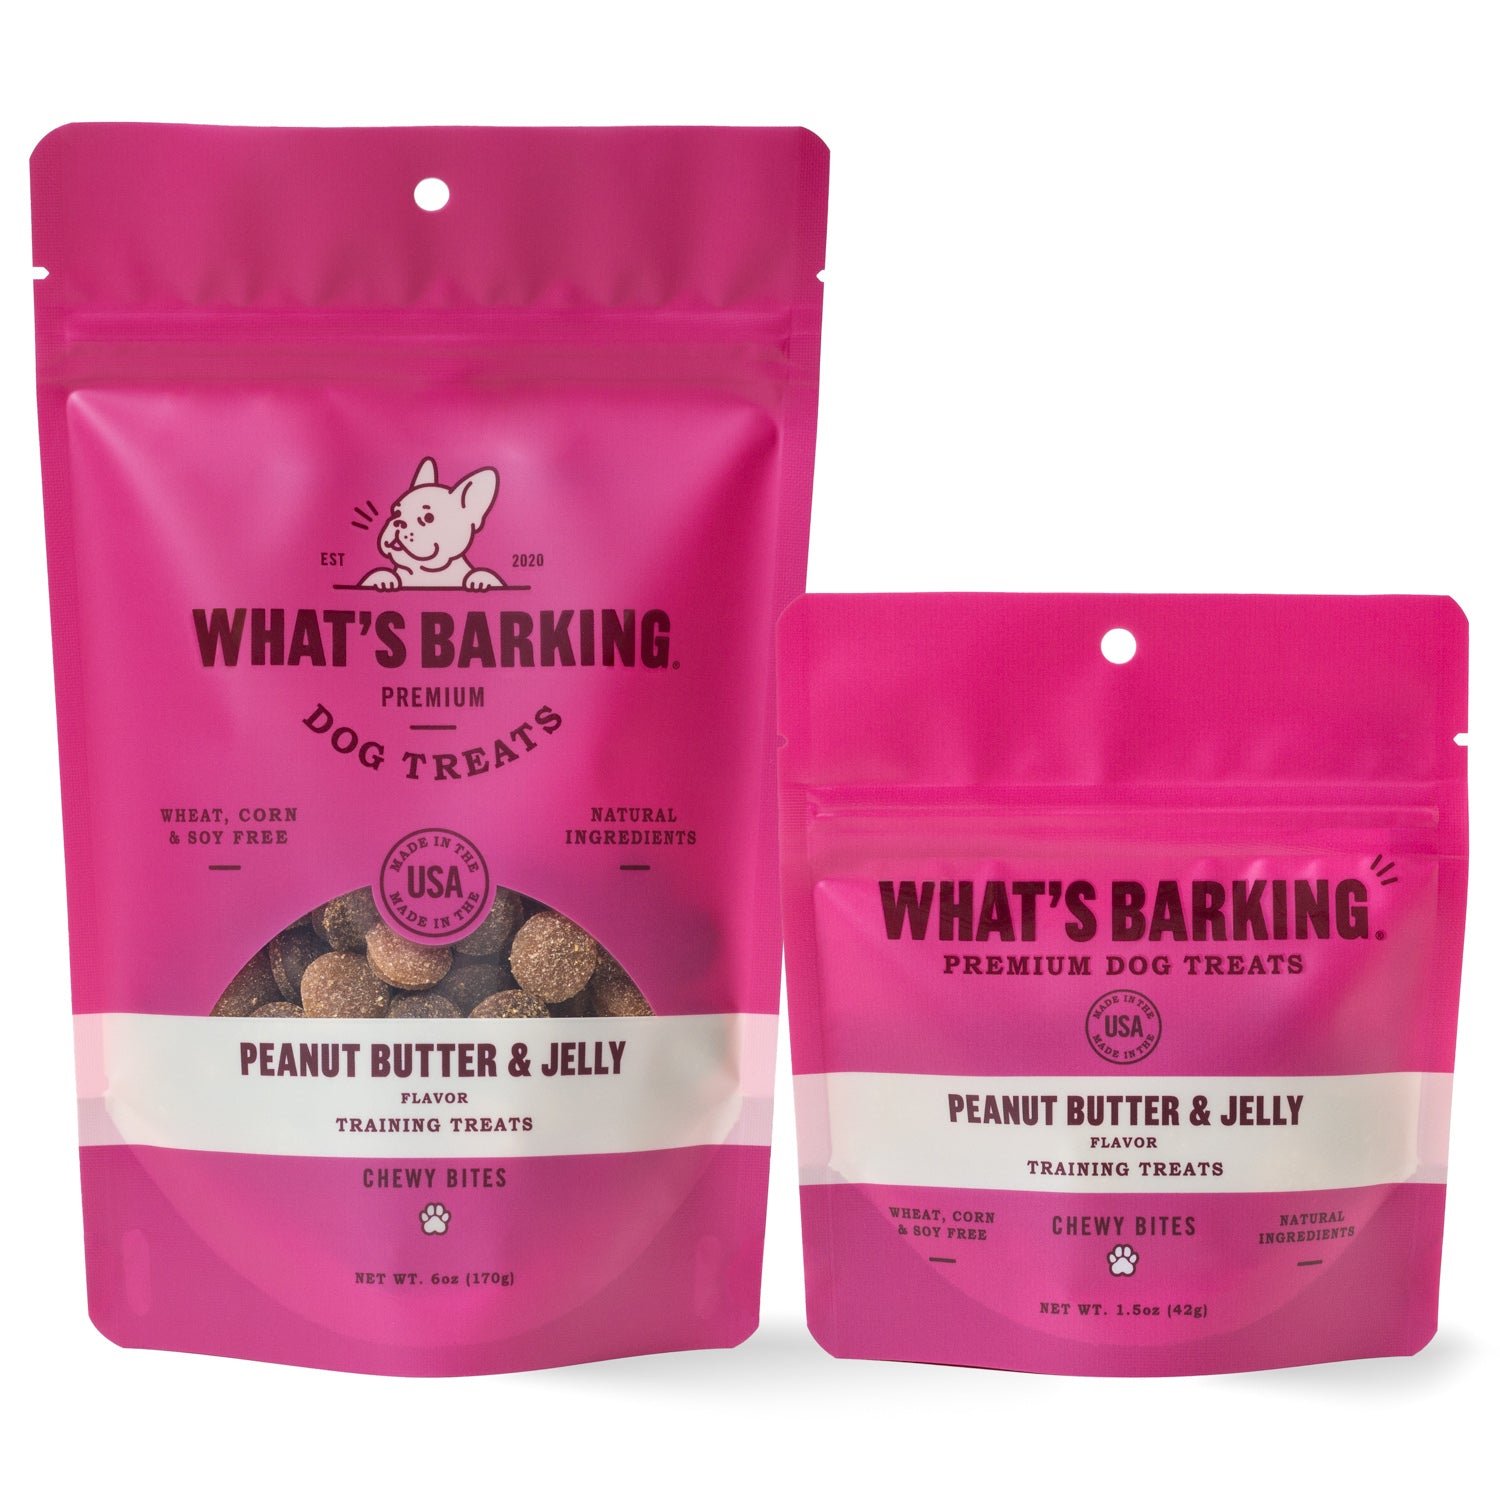 What's Barking - Peanut Butter & Jelly Chewy Bites Dog Treats